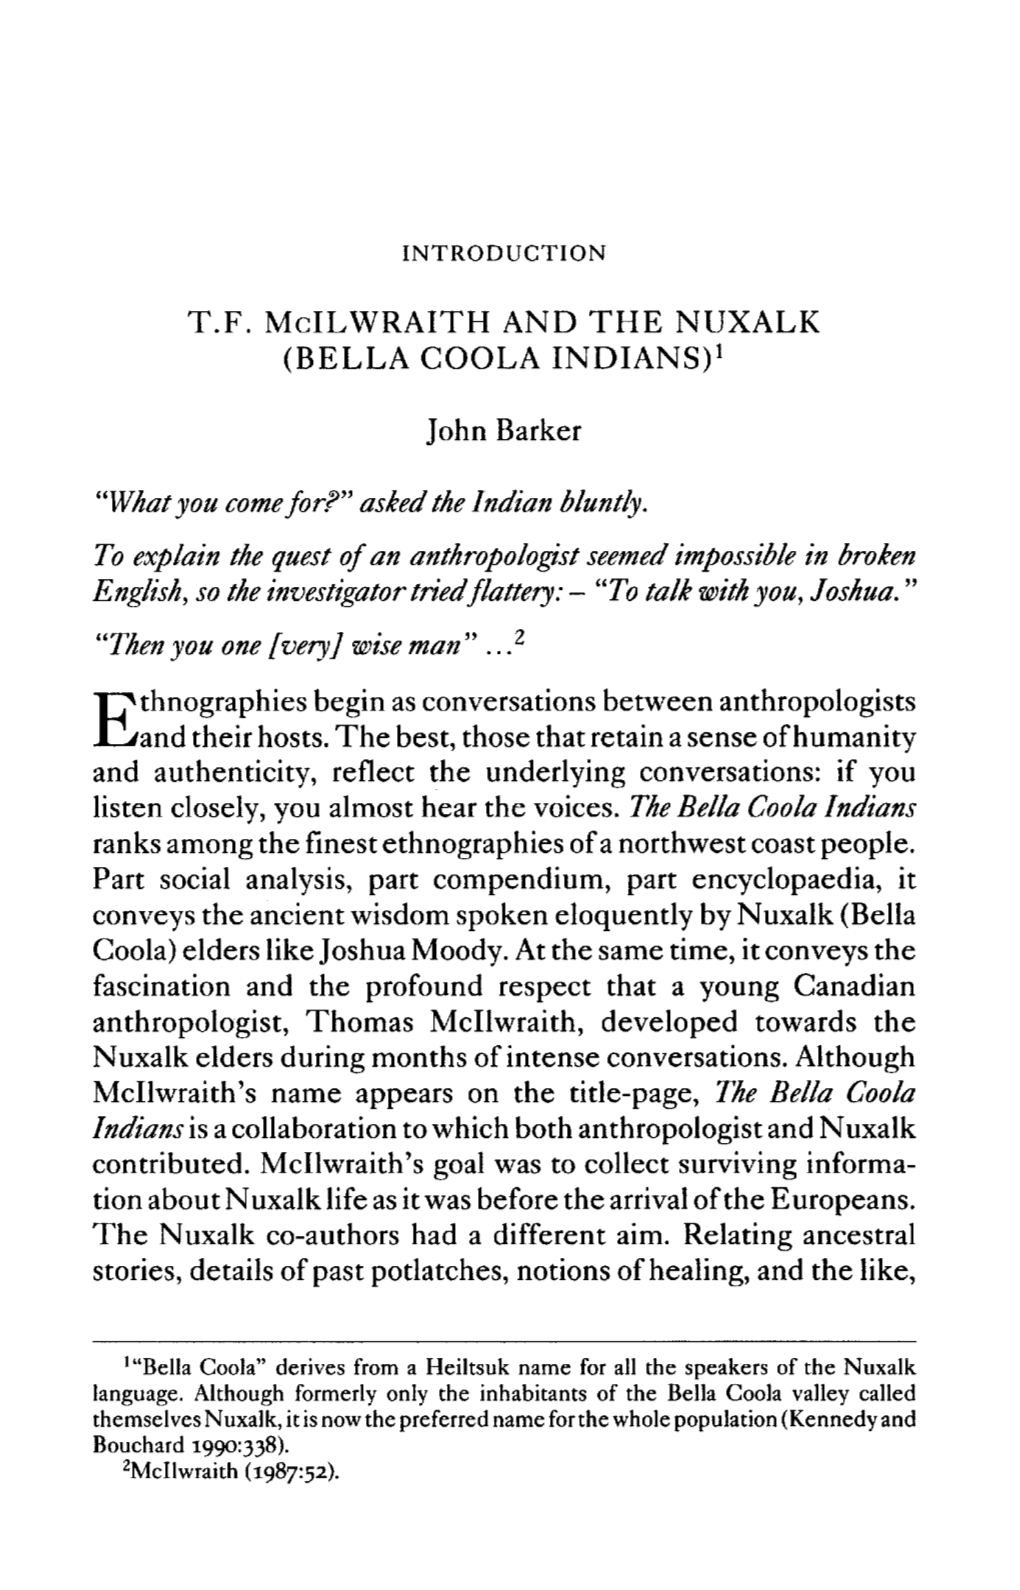 T.F. Mcilwraith and the NUXALK (BELLA COOLA INDIANS)1